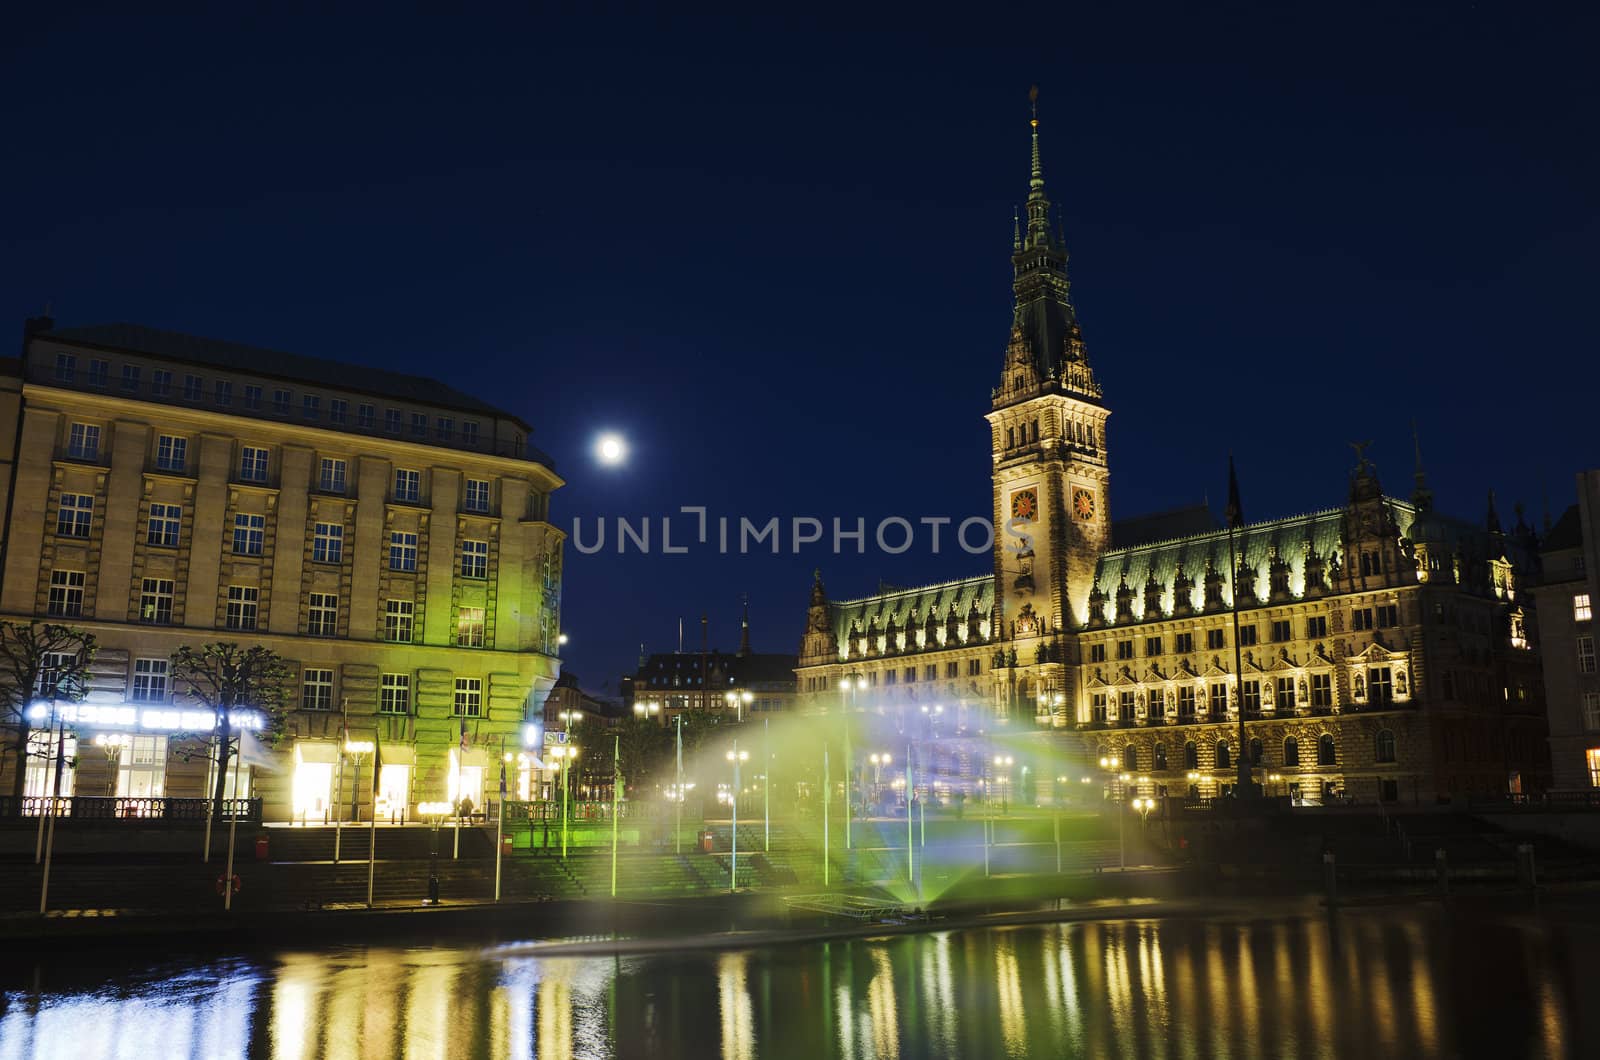 A colorful lighted fountain on the Alster in front of the town hall of Hamburg.